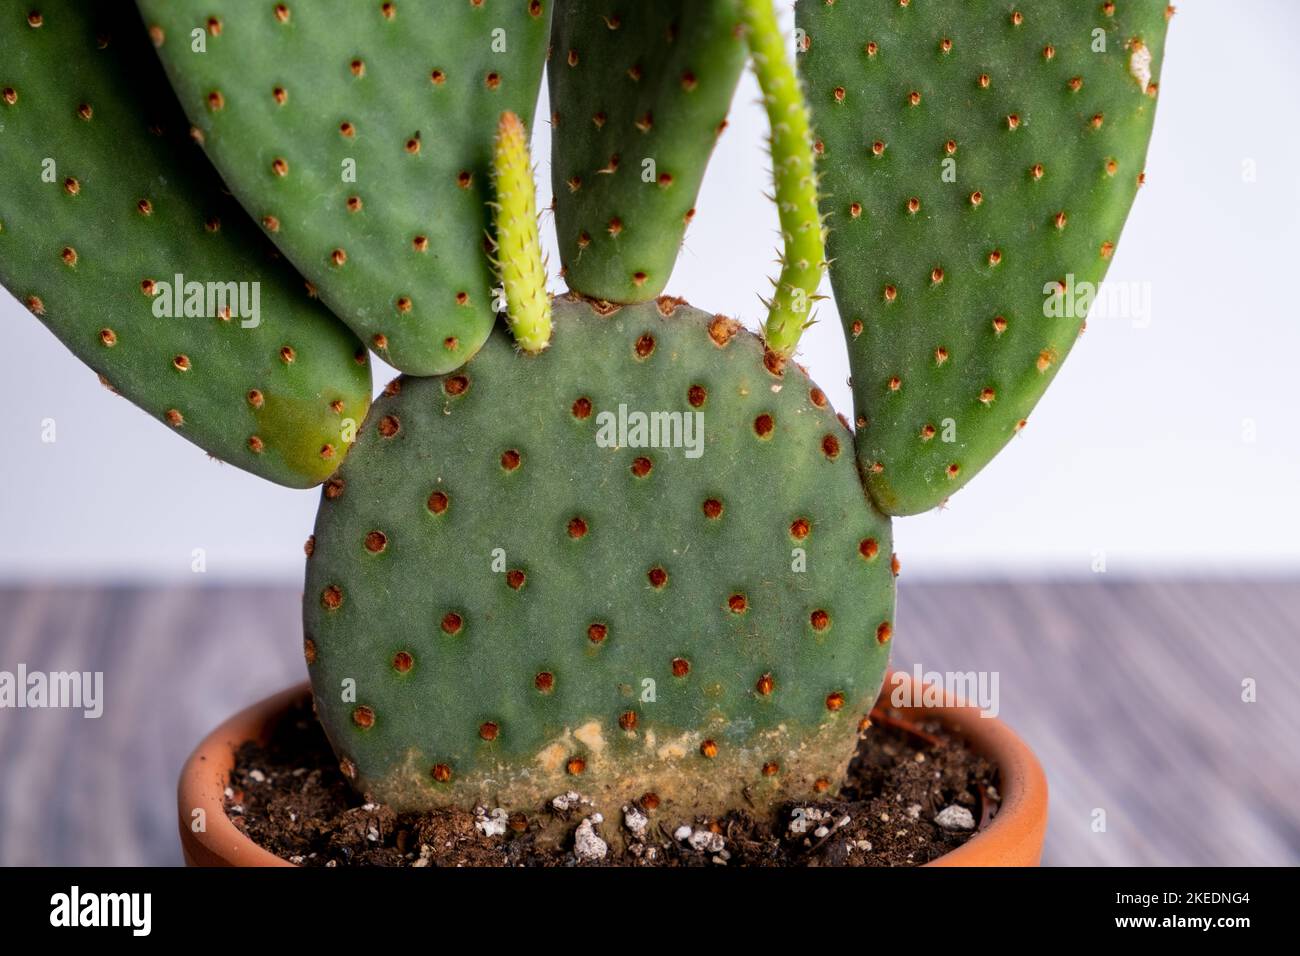 Detail of opuntia cactus potted plant. Succulent plant in pot on table. Cactus lover Stock Photo